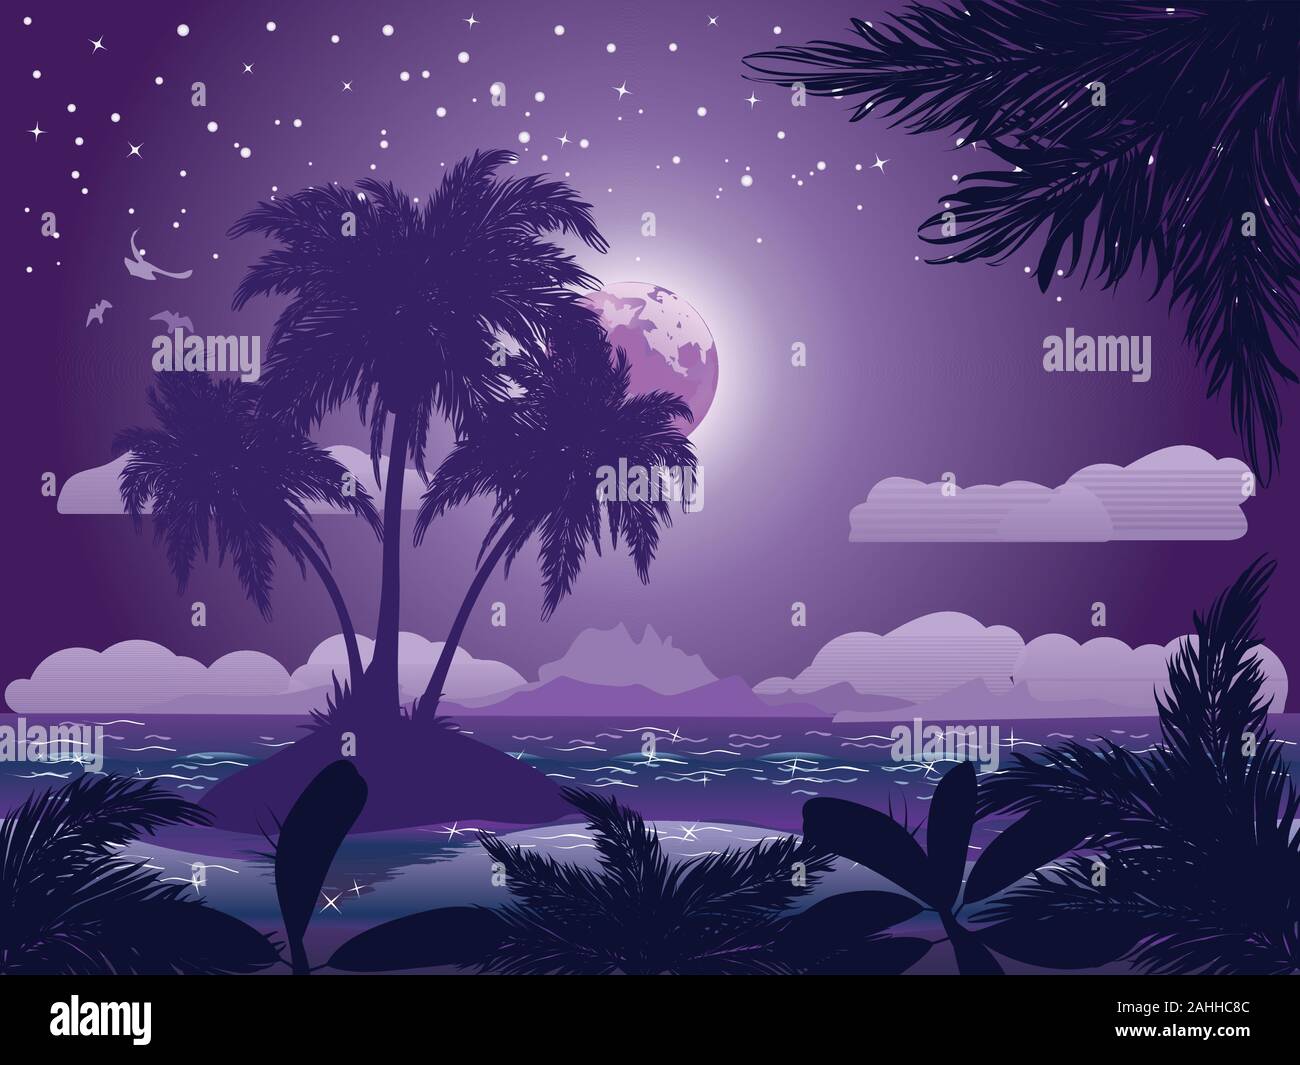 A tropical island at night under starry sky background. Stock Vector